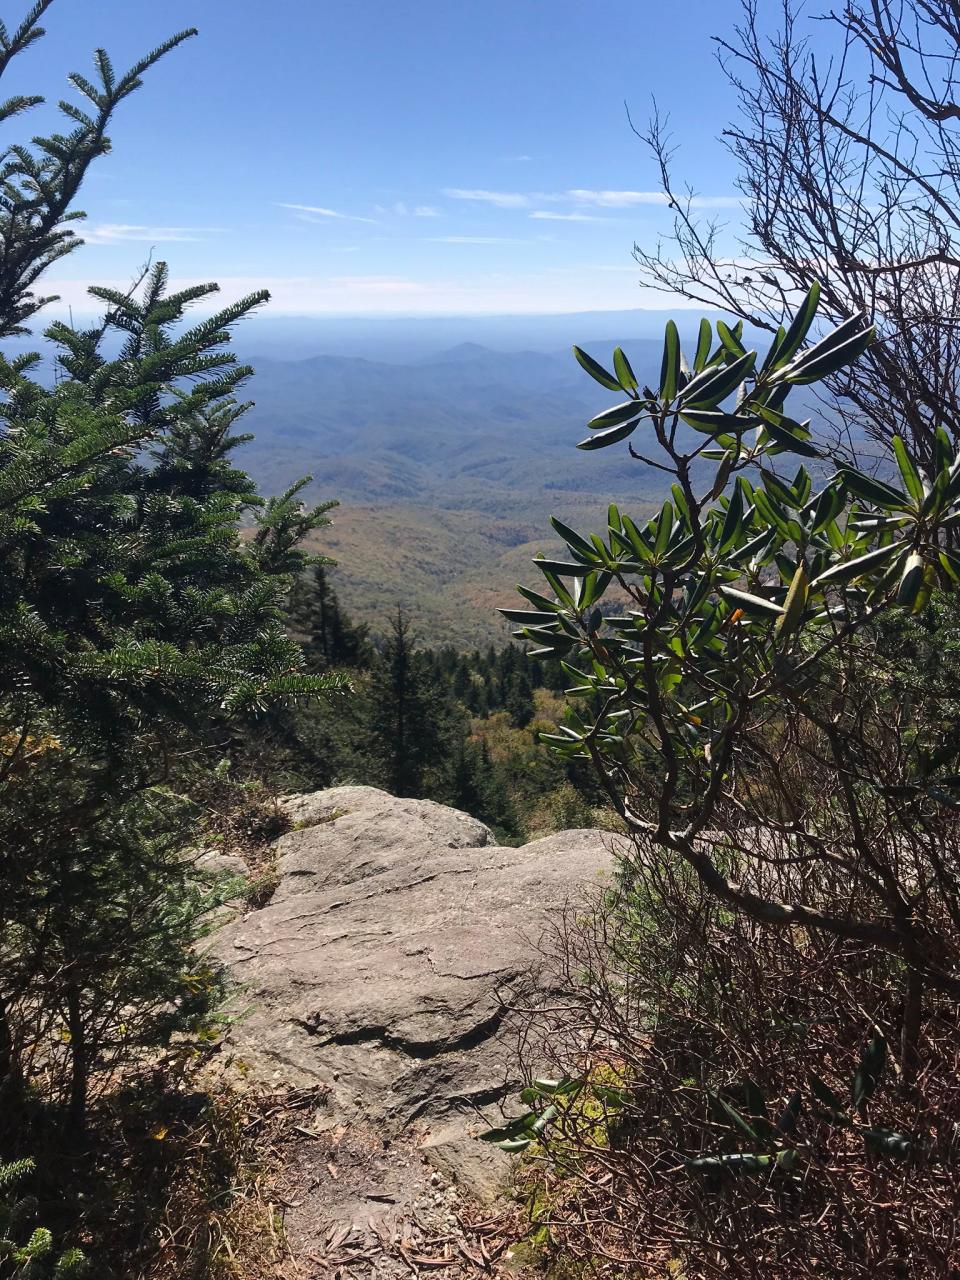 Cliffside campsite at Grandfather Mountain State Park is about a 4-mile, hike-in-only, primitive campsite that is closed Nov. 10 to Dec. 1 due to increased fire risk.